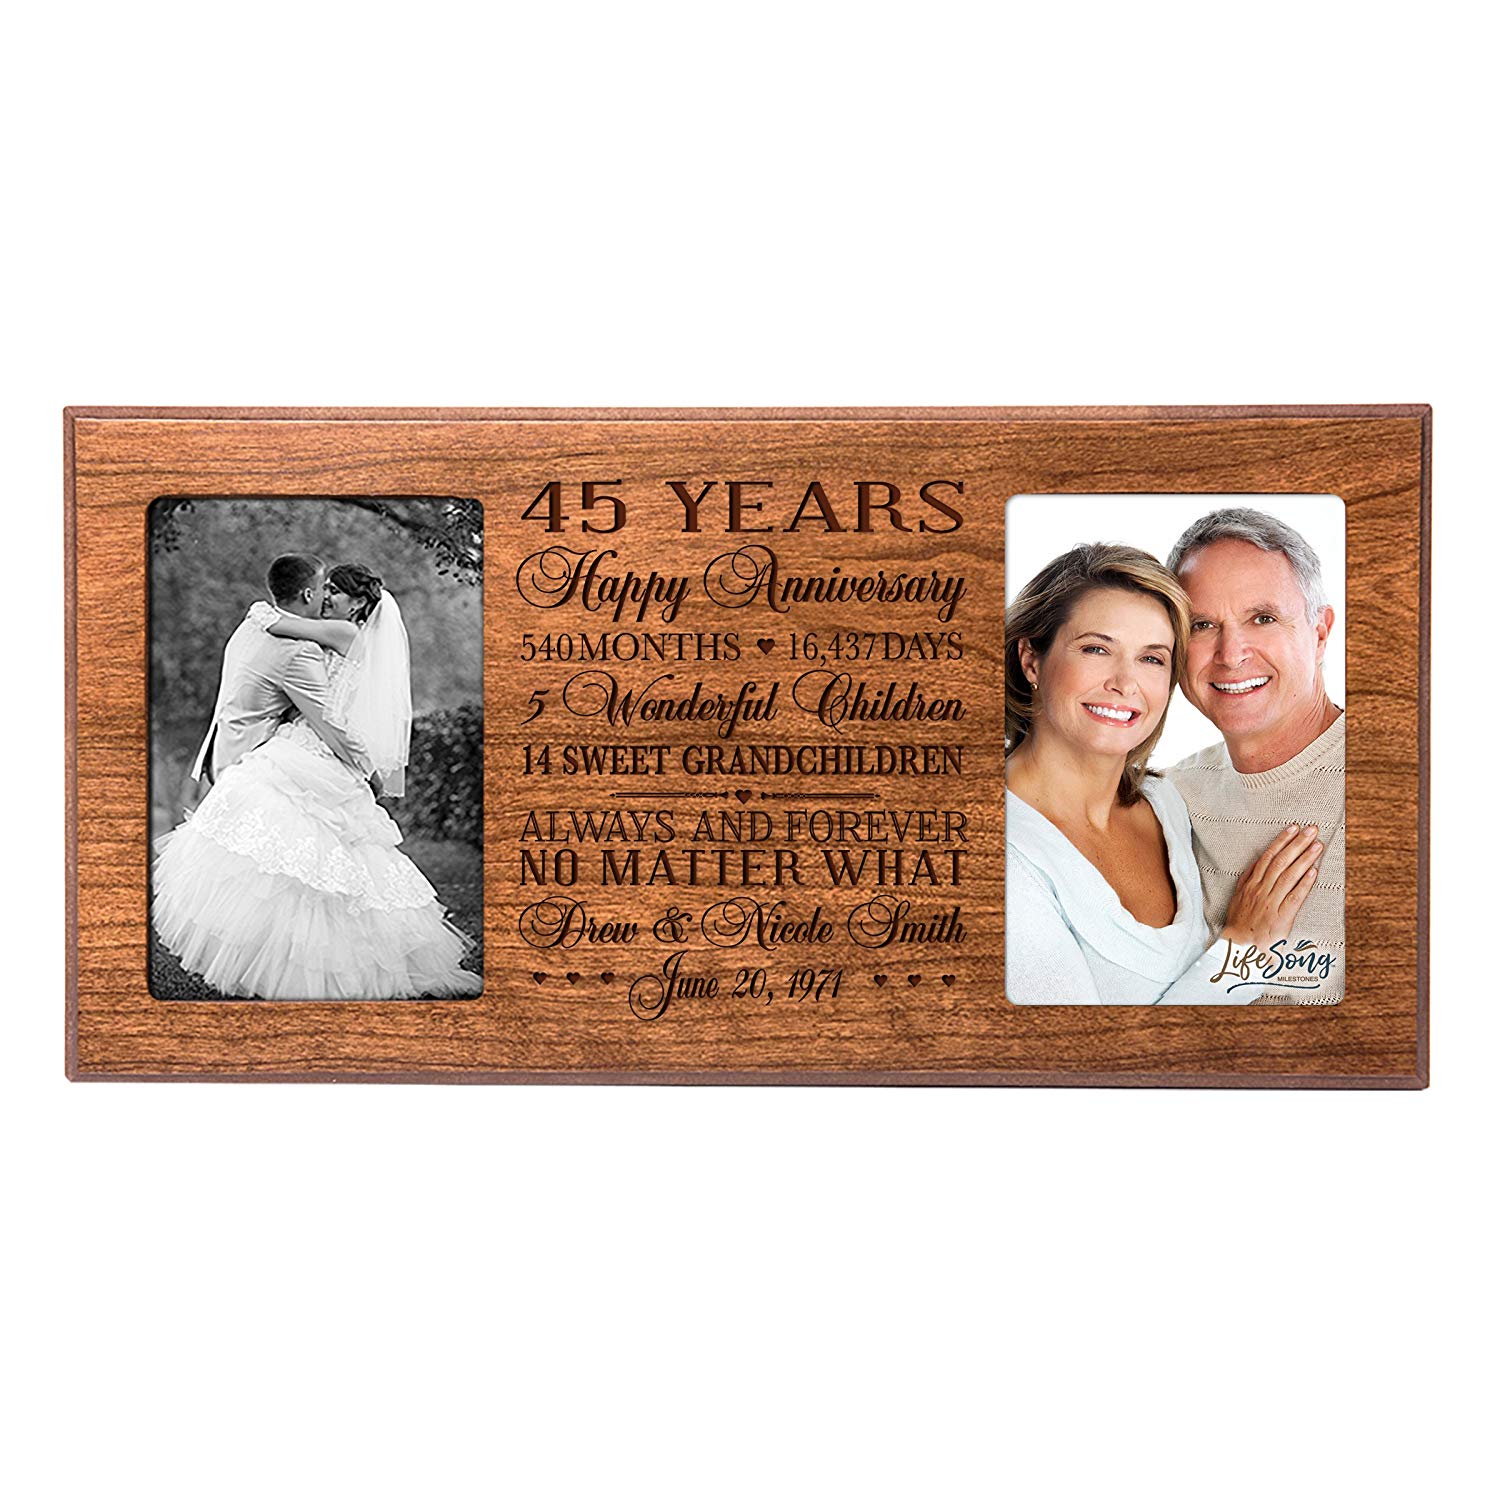 Lifesong Milestones Personalized Picture Frame for Couples 45th Wedding Anniversary Decorations